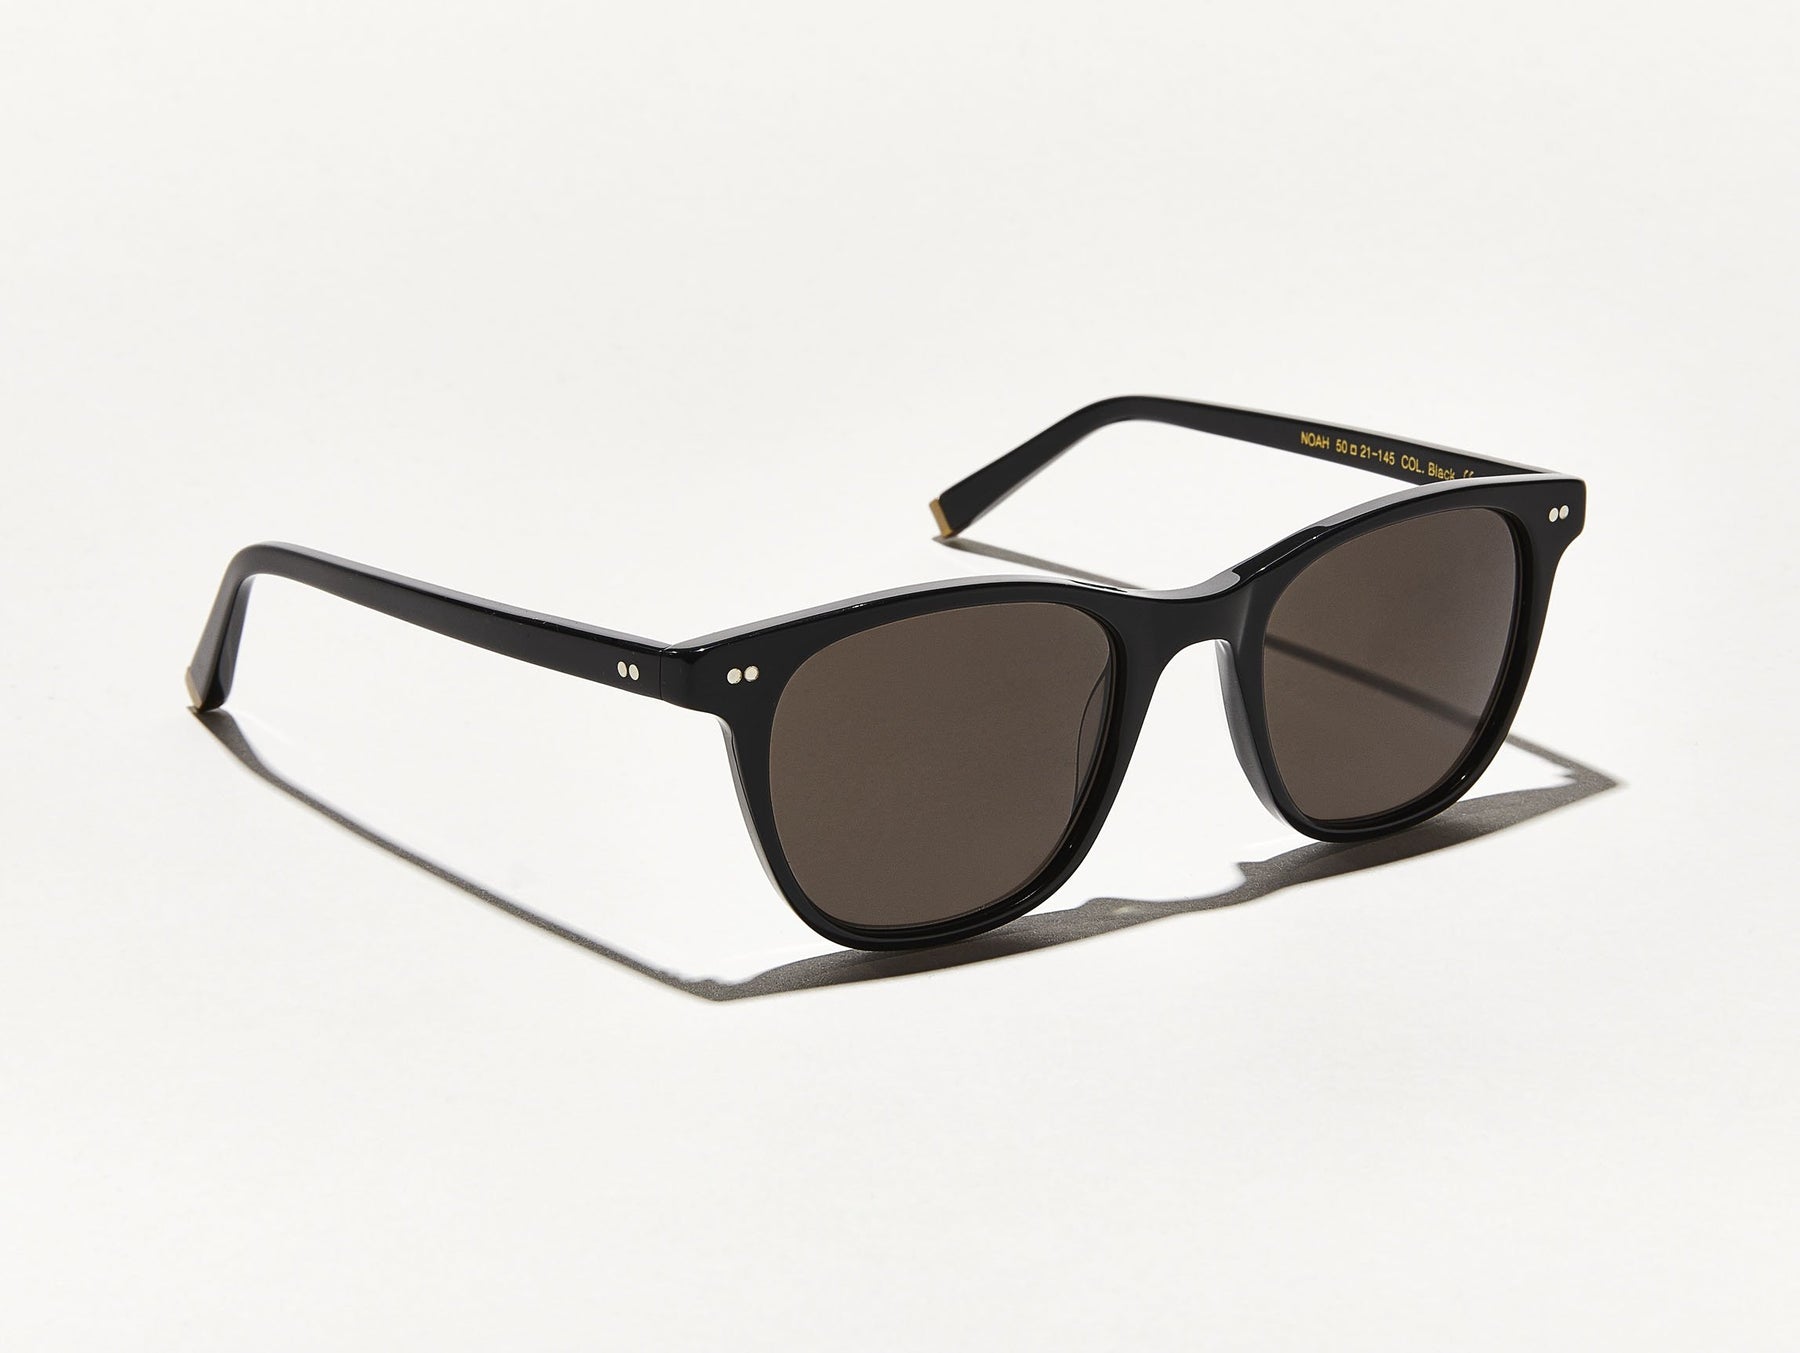 The NOAH SUN in Black with Grey Lenses